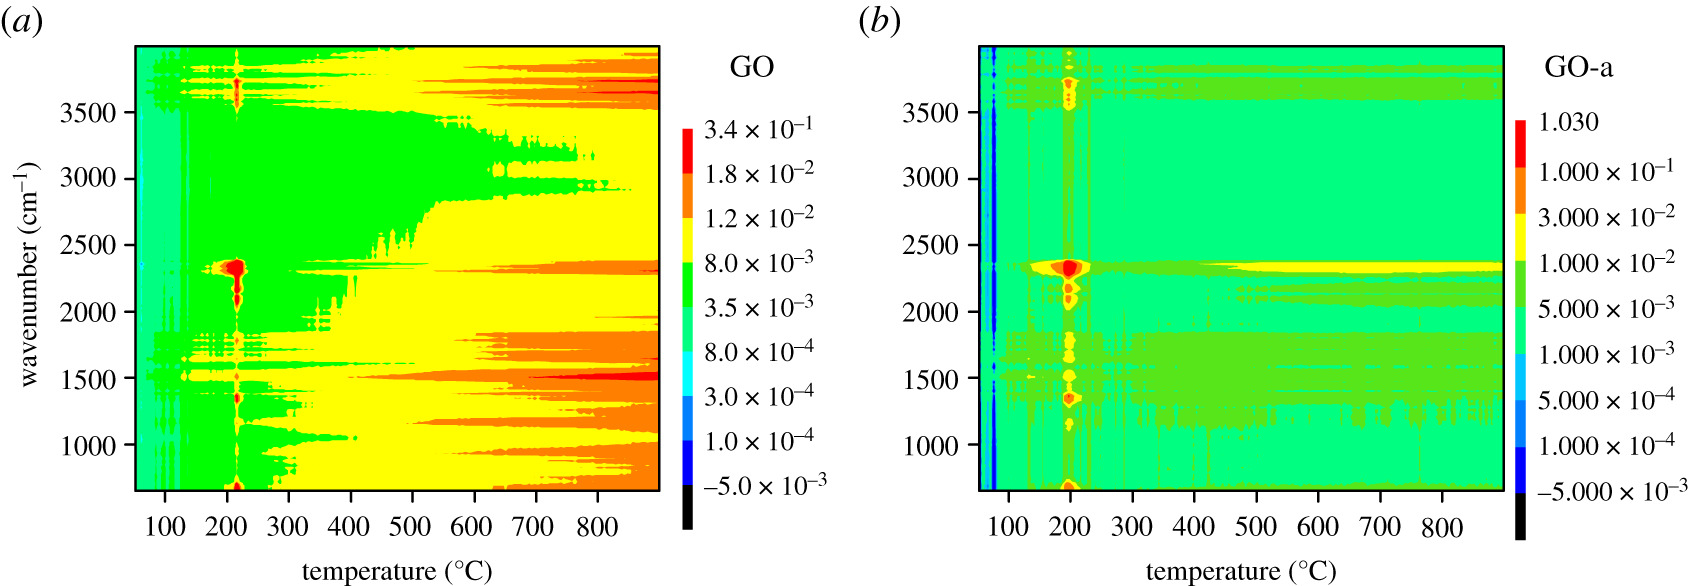 Contour plots of infrared absorption spectrum of gaseous products of (a) graphene oxide prepared after 5 days (GO) and (b) graphene oxide aged for 2 years (GO-a).